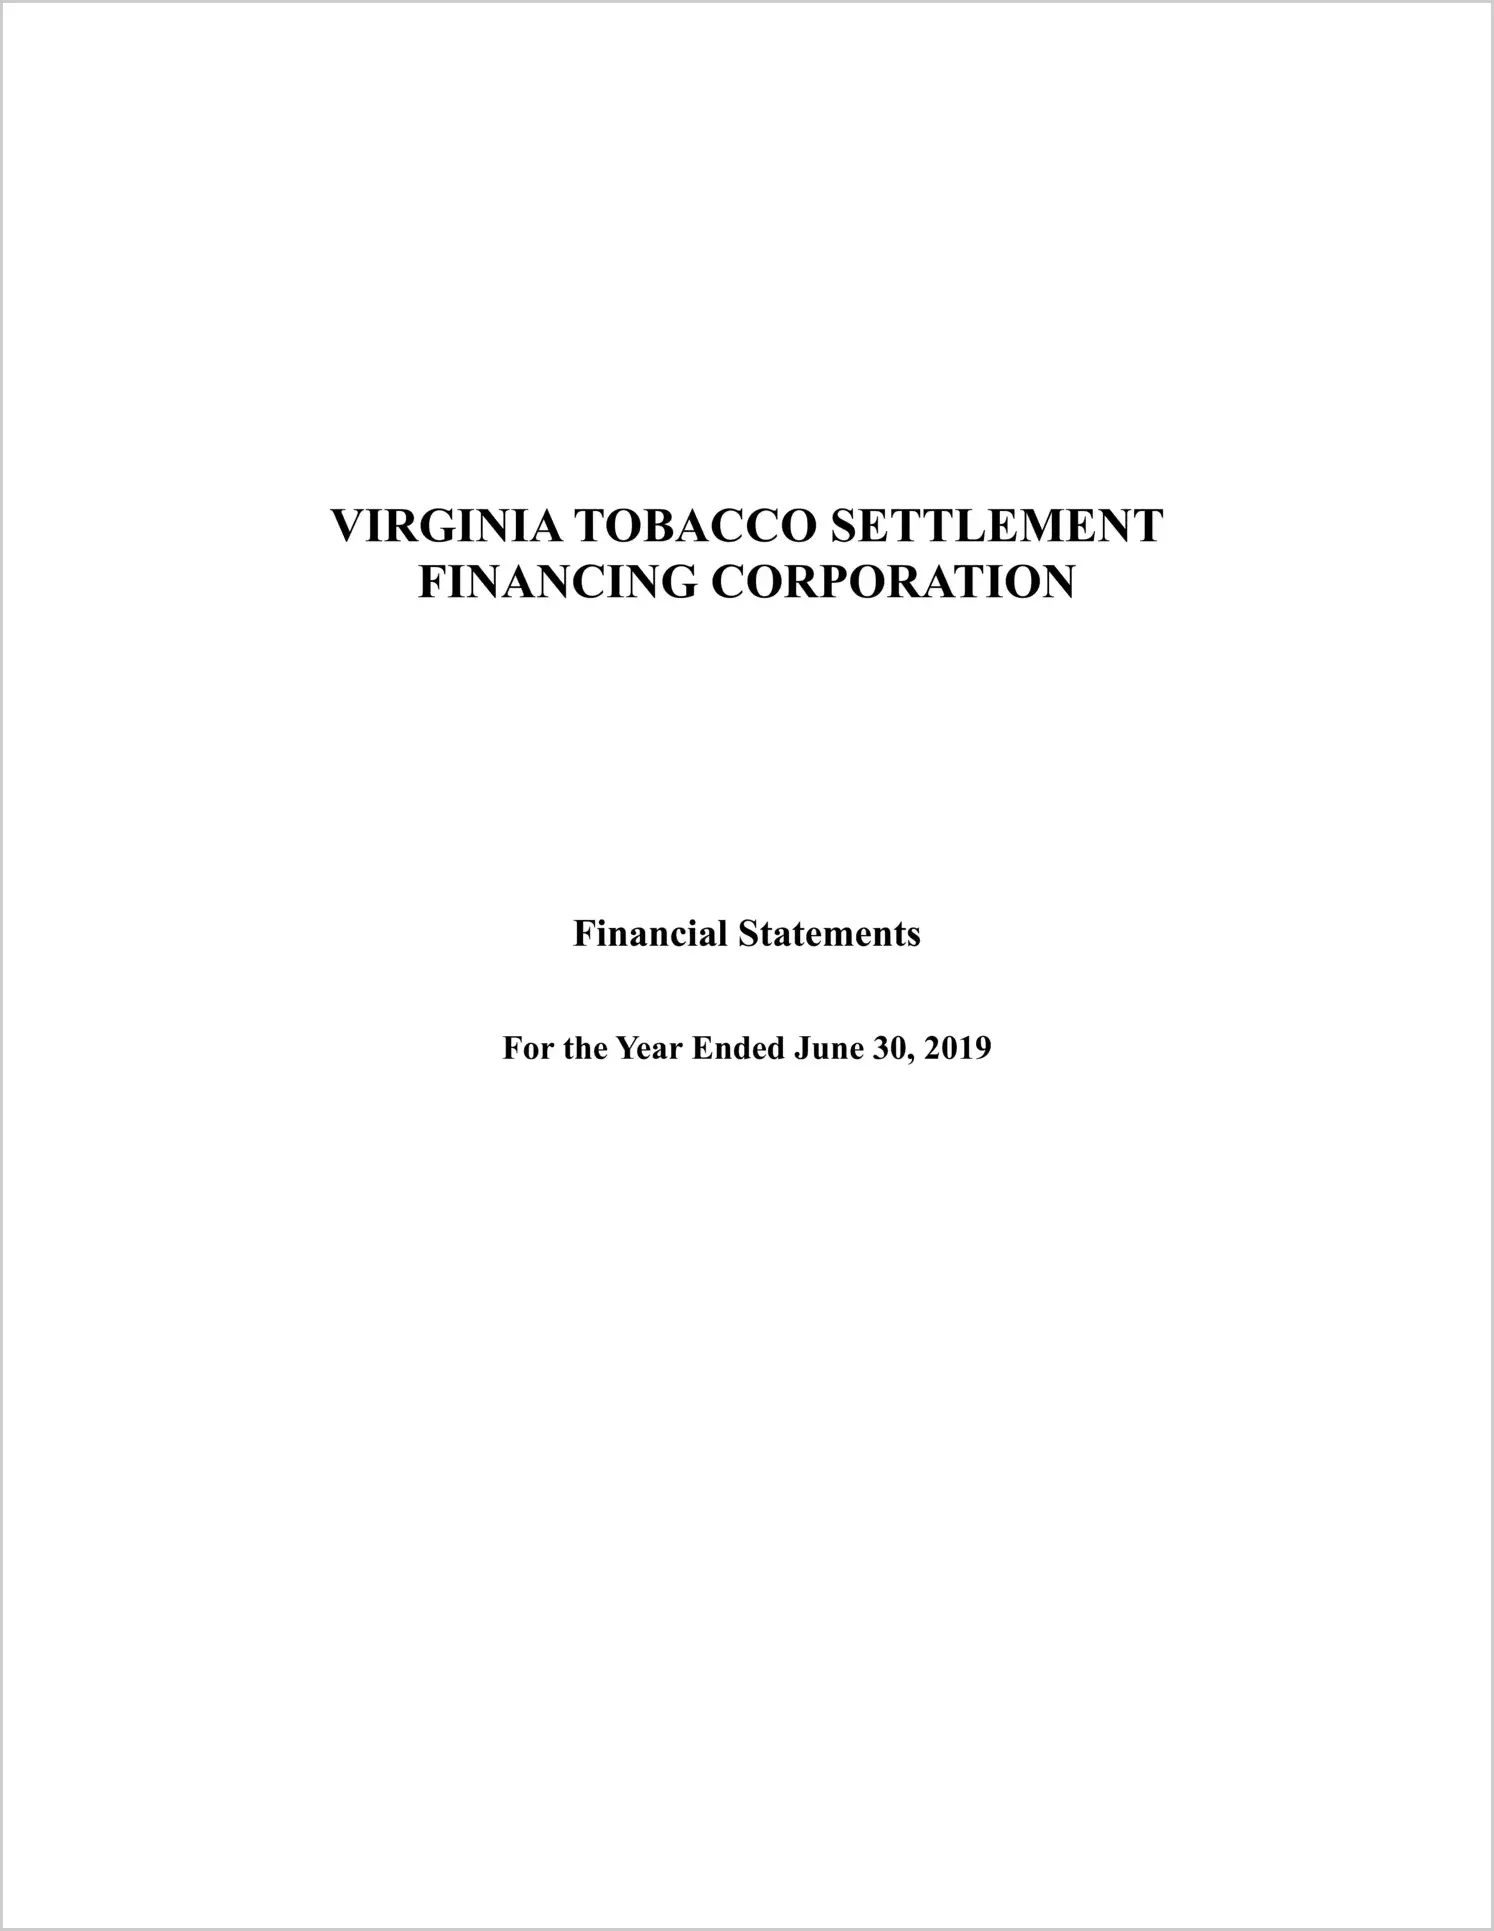 Virginia Tobacco Settlement Financing Corporation for the year ended June 30, 2019